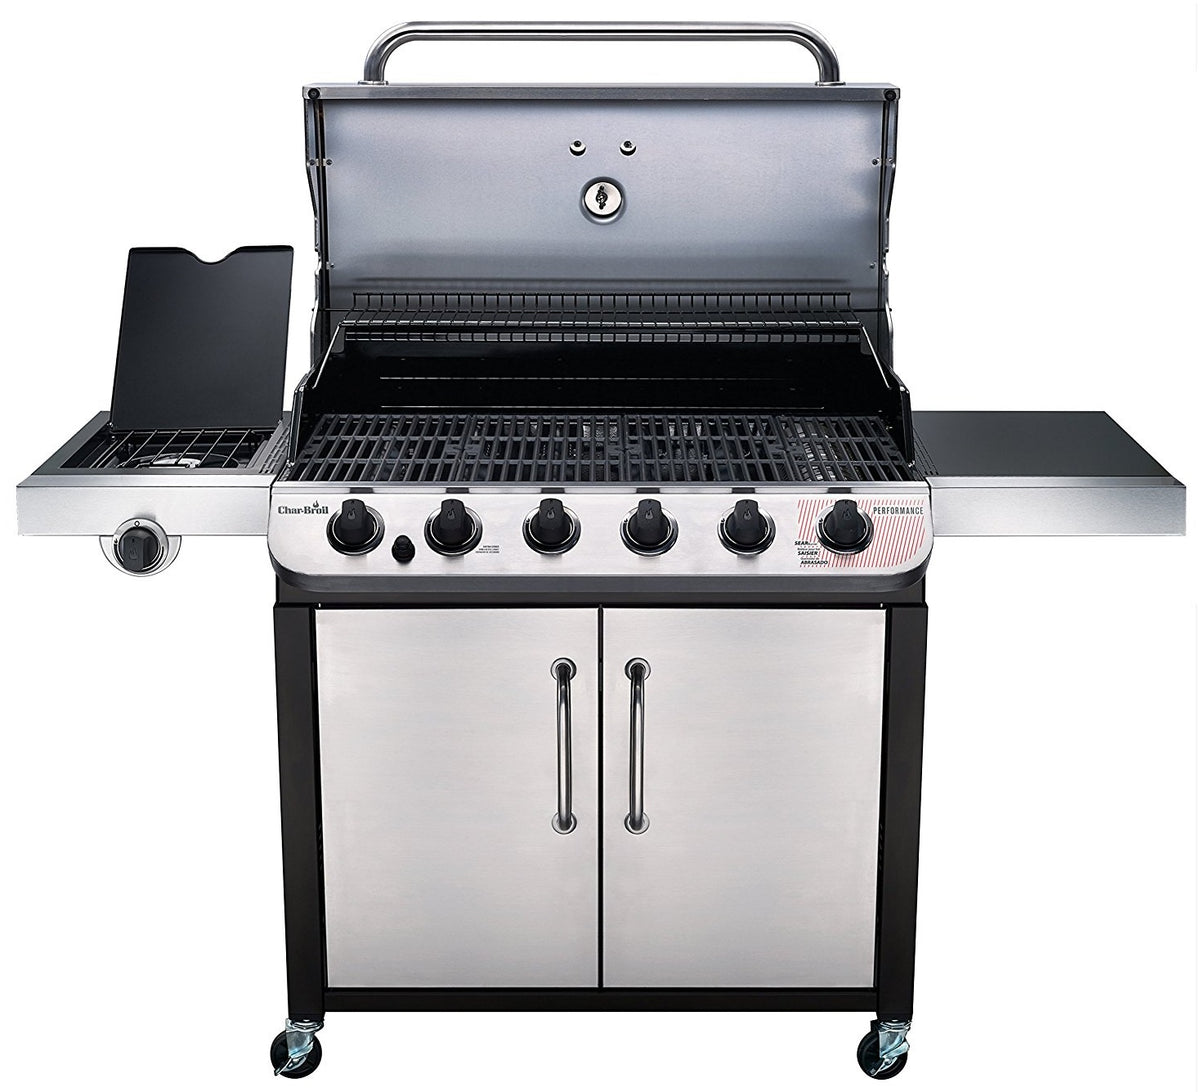 buy grills at cheap rate in bulk. wholesale & retail outdoor living appliances store.